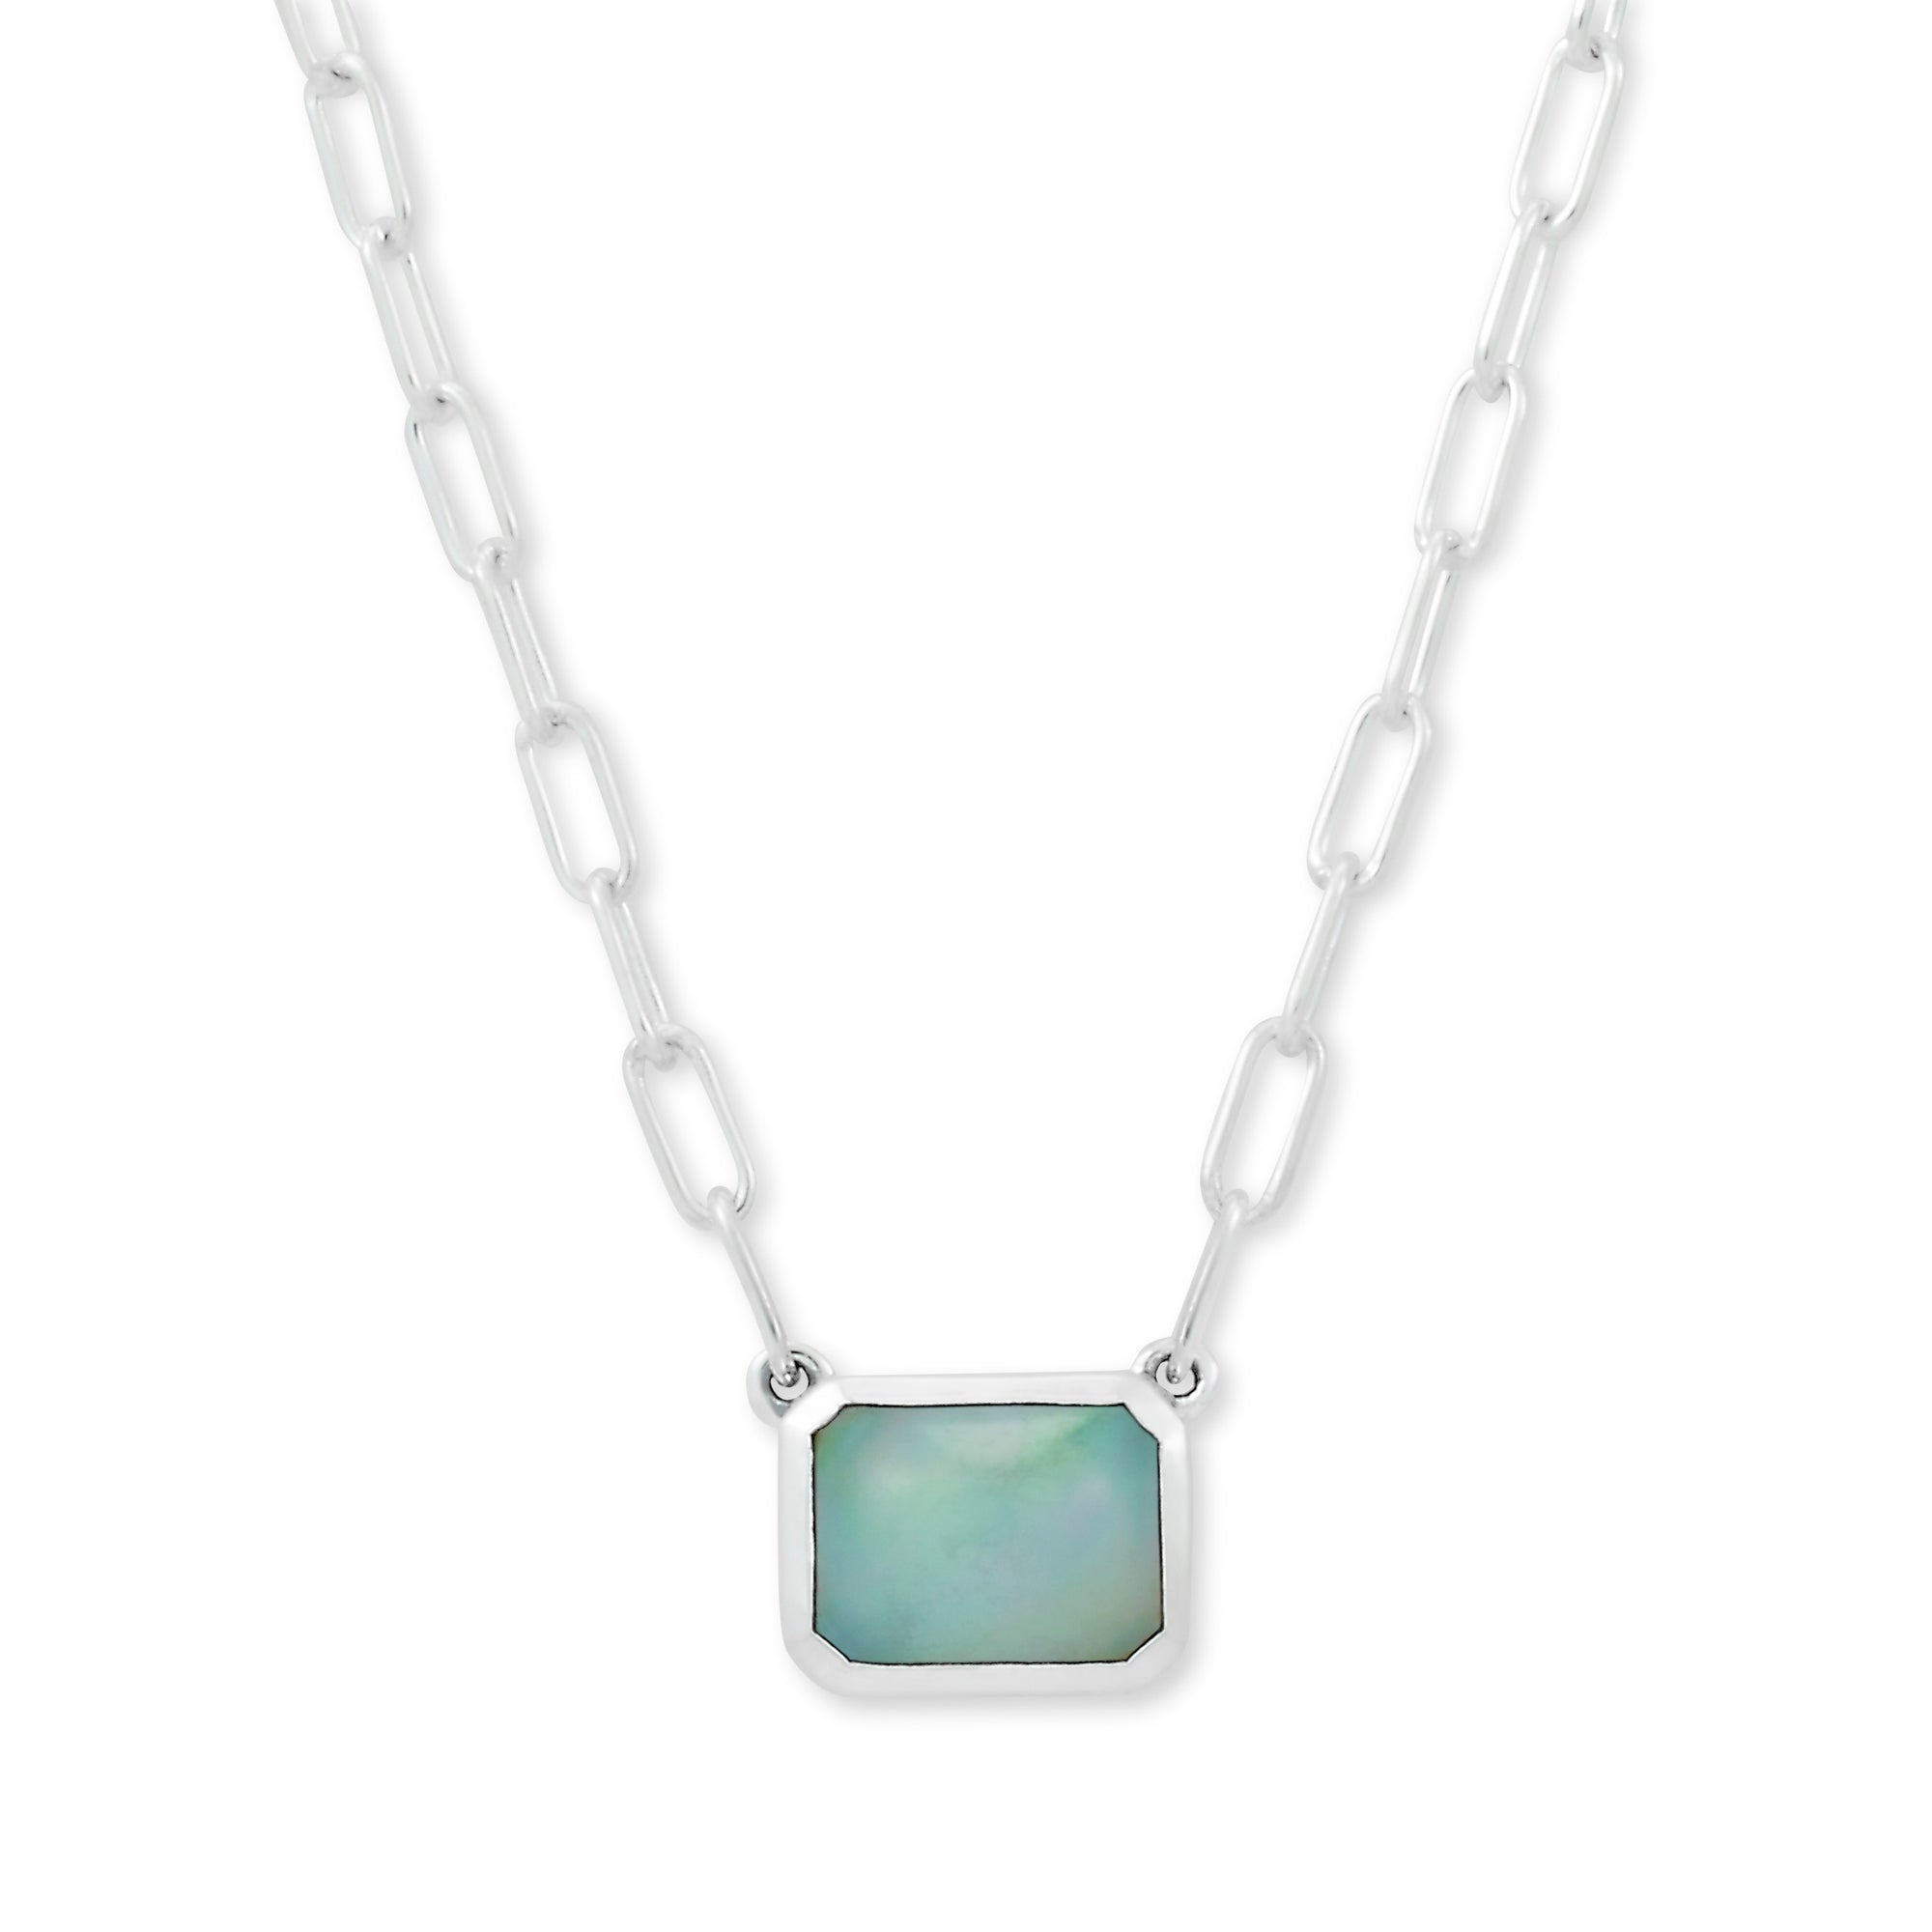 Opal Eirini Necklace available at Talisman Collection Fine Jewelers in El Dorado Hills, CA and online. Specs: Opal Eirini Necklace features an emerald-cut opal solitaire measuring 7x9mm, and is set in Sterling Silver